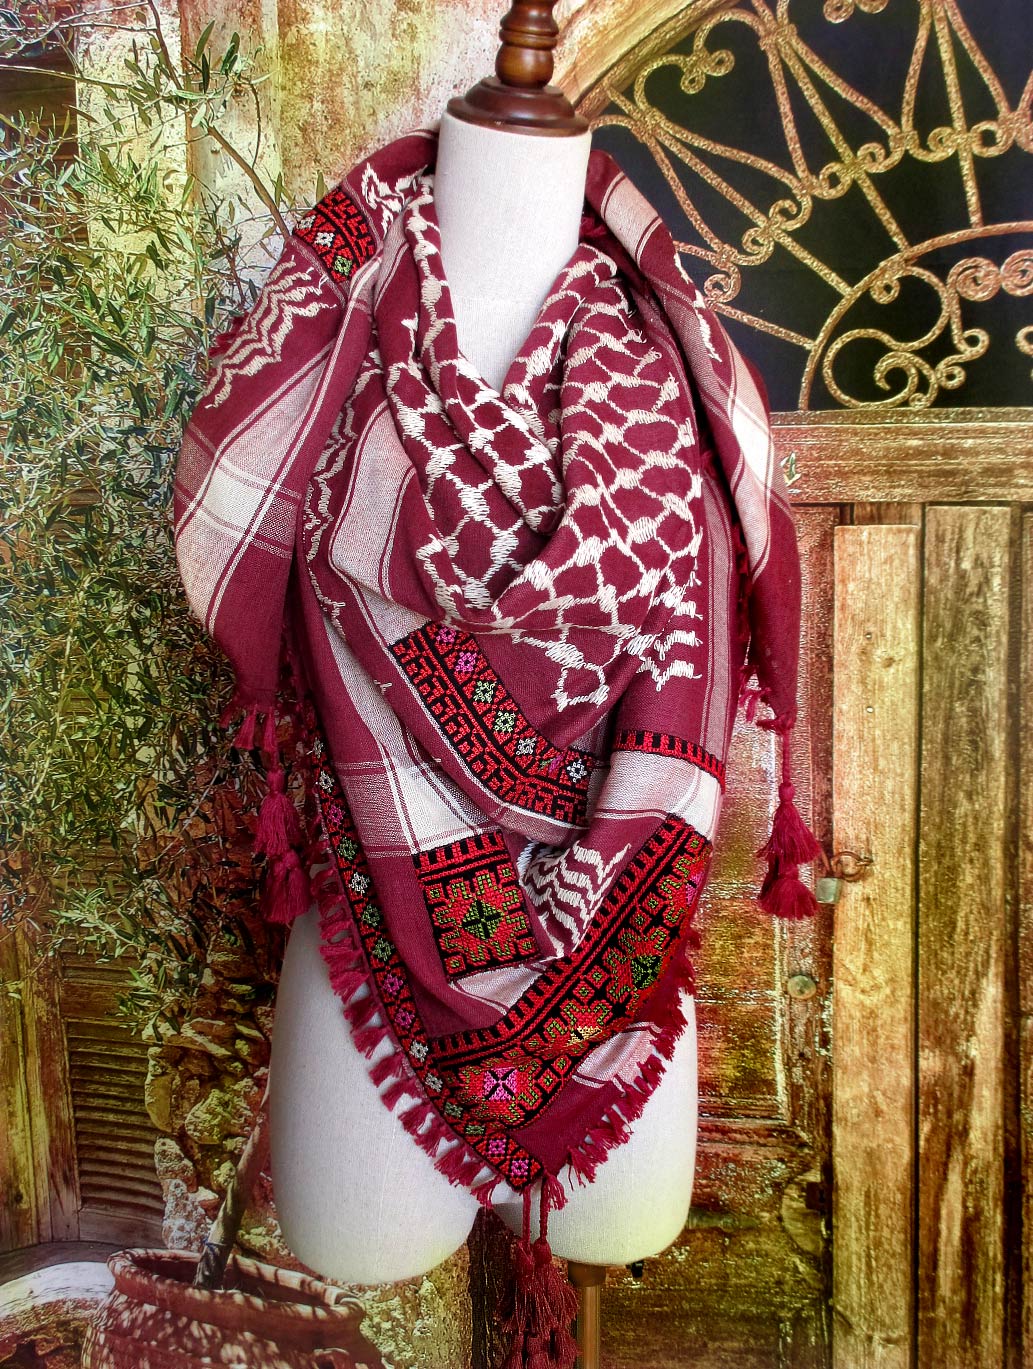 Keffiyeh scarf with Palestinian embroidery